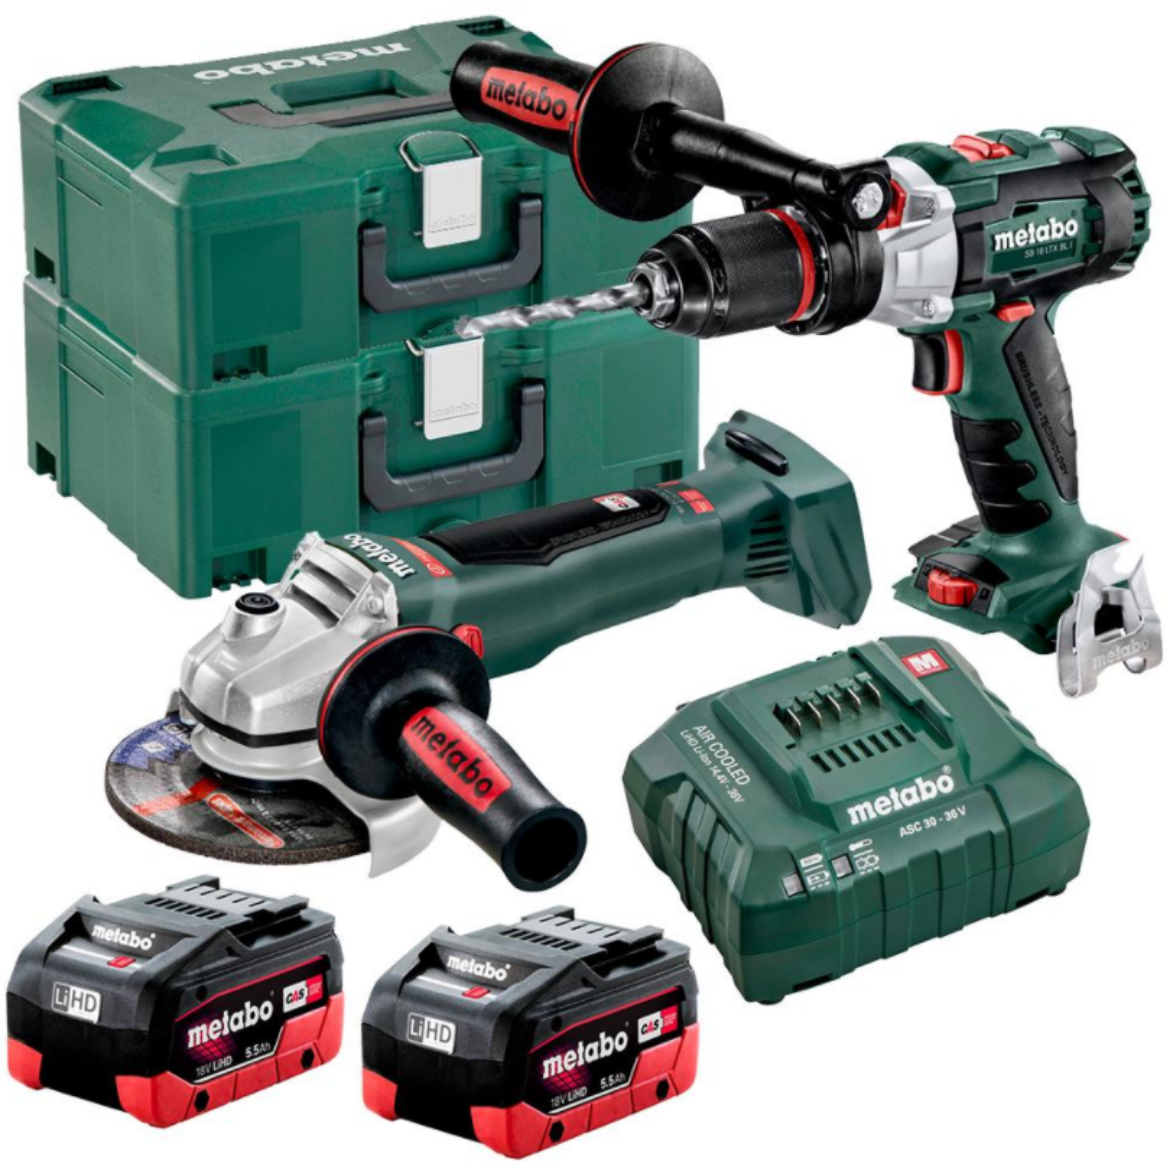 Picture of METABO 18V 5.5AH 2 PIECE KIT 120NM BRUSHLESS HAMMER DRILL + 125MM BRUSHLESS ANGLE GRINDER